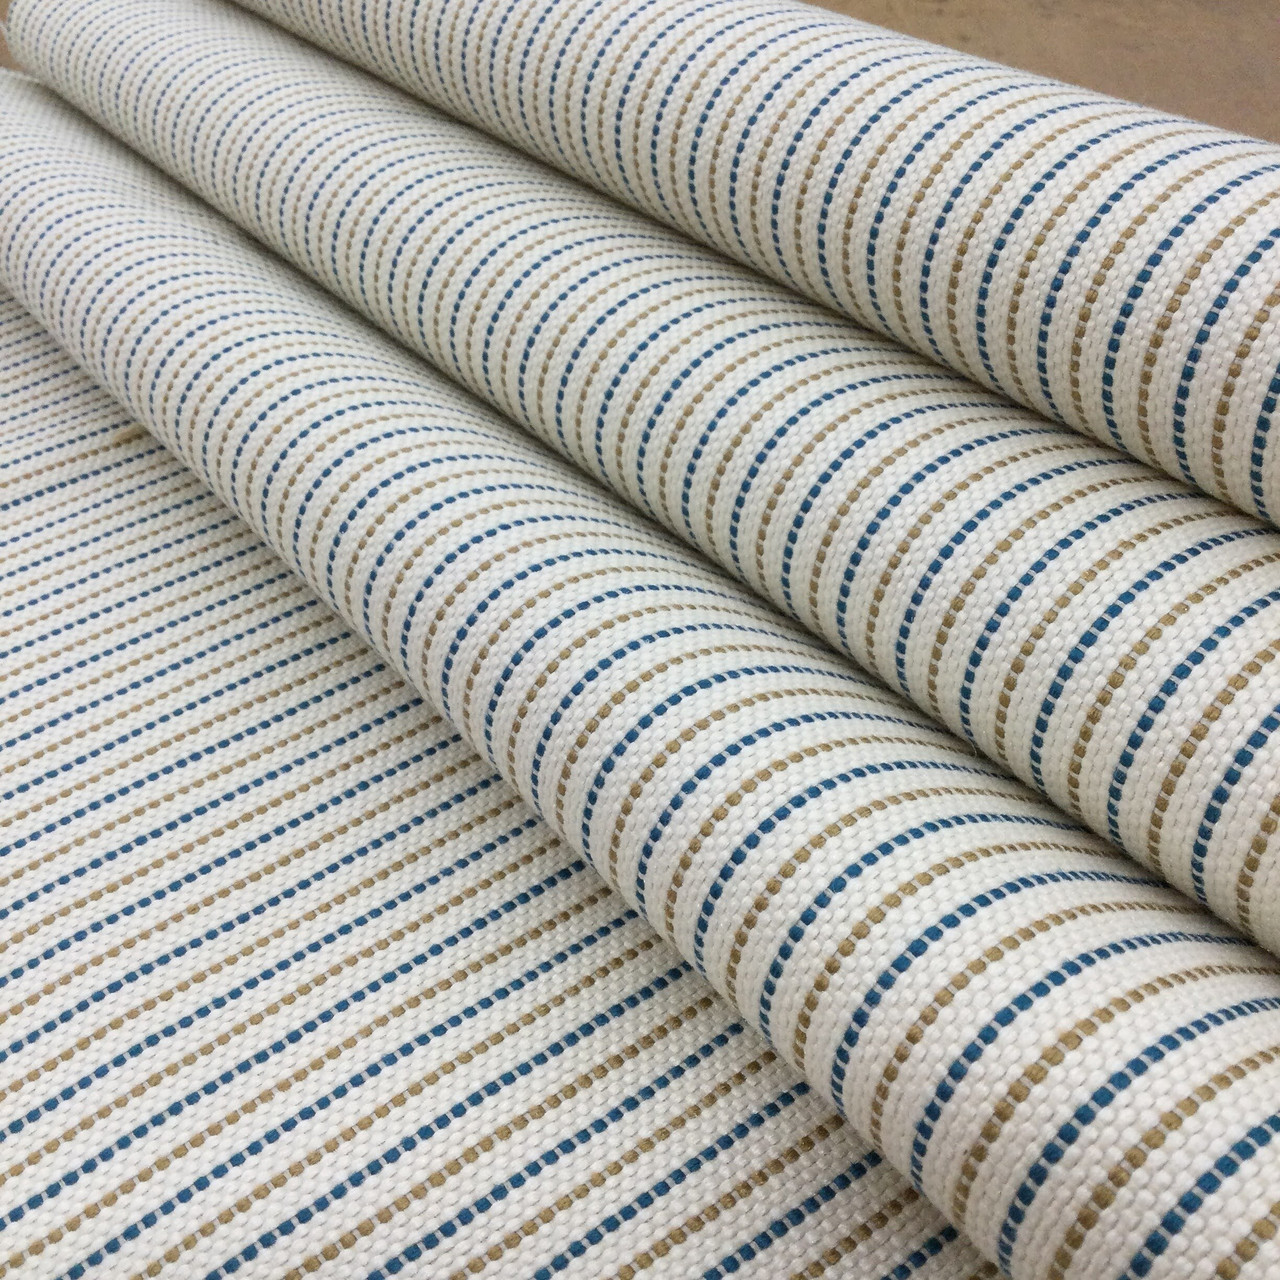 Striped Fabric in Off-White / Teal / Gold | Upholstery / Slipcovers /  Drapery | 54